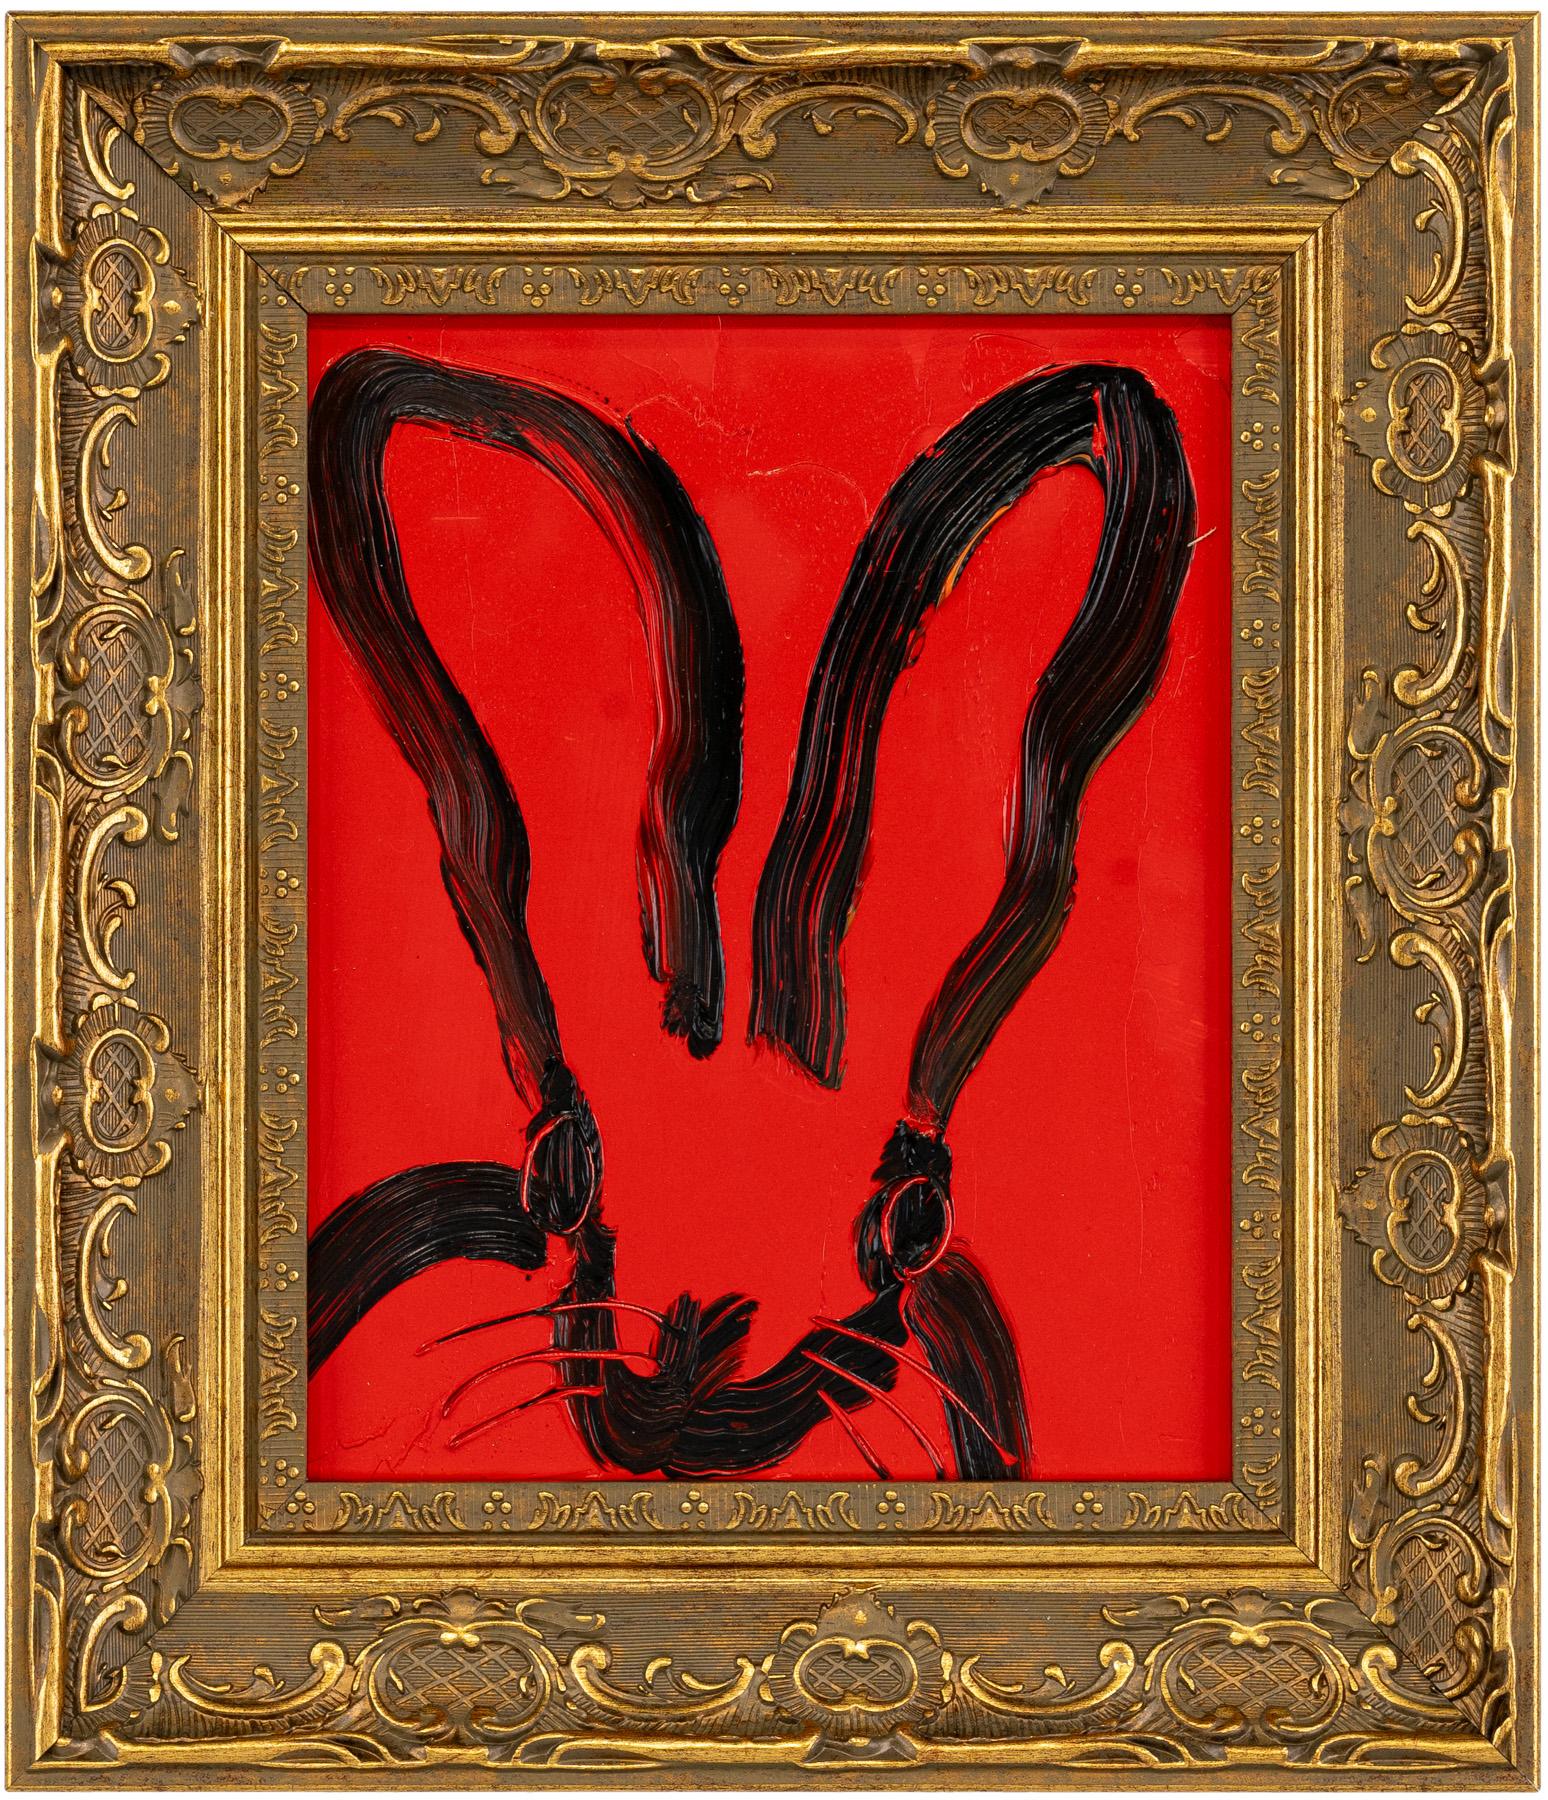 Hunt Slonem "Red Rover" Bunny
A gestured bunny rabbit in black on a red background. Framed in a vintage gold frame.

Unframed: 10 x 8 inches
Framed: 14.5 x 12.5 inches
*Painting is framed - Please note Hunt Slonem paintings with frames may show